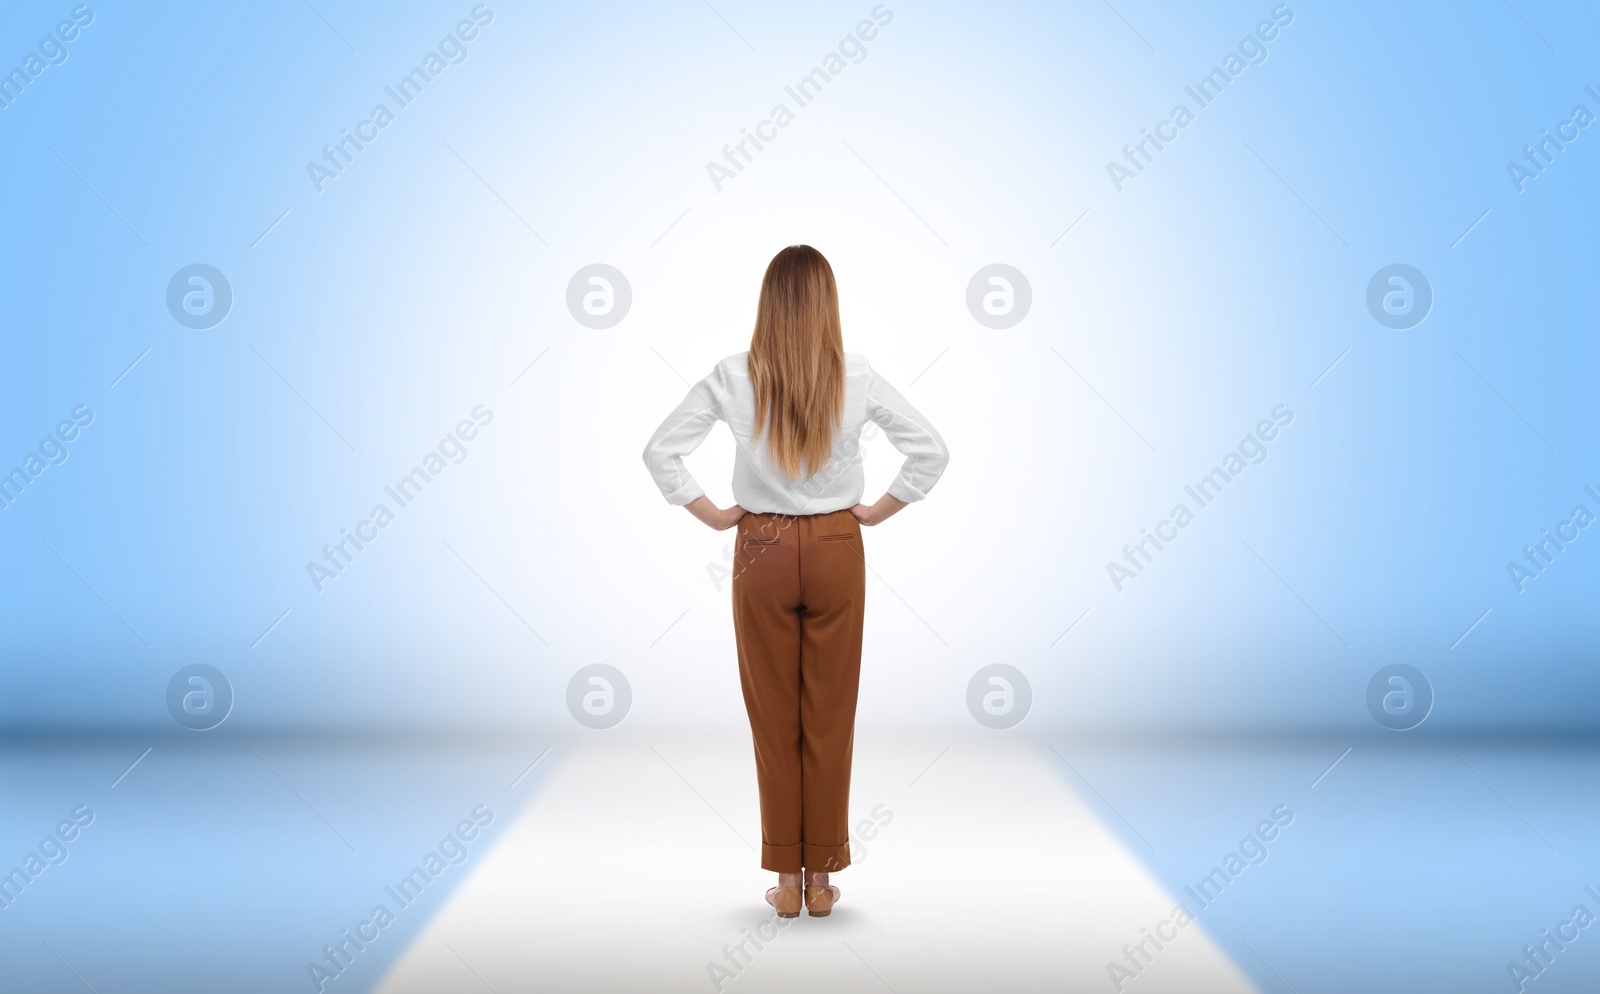 Image of Woman standing in front of light blue wall, back view